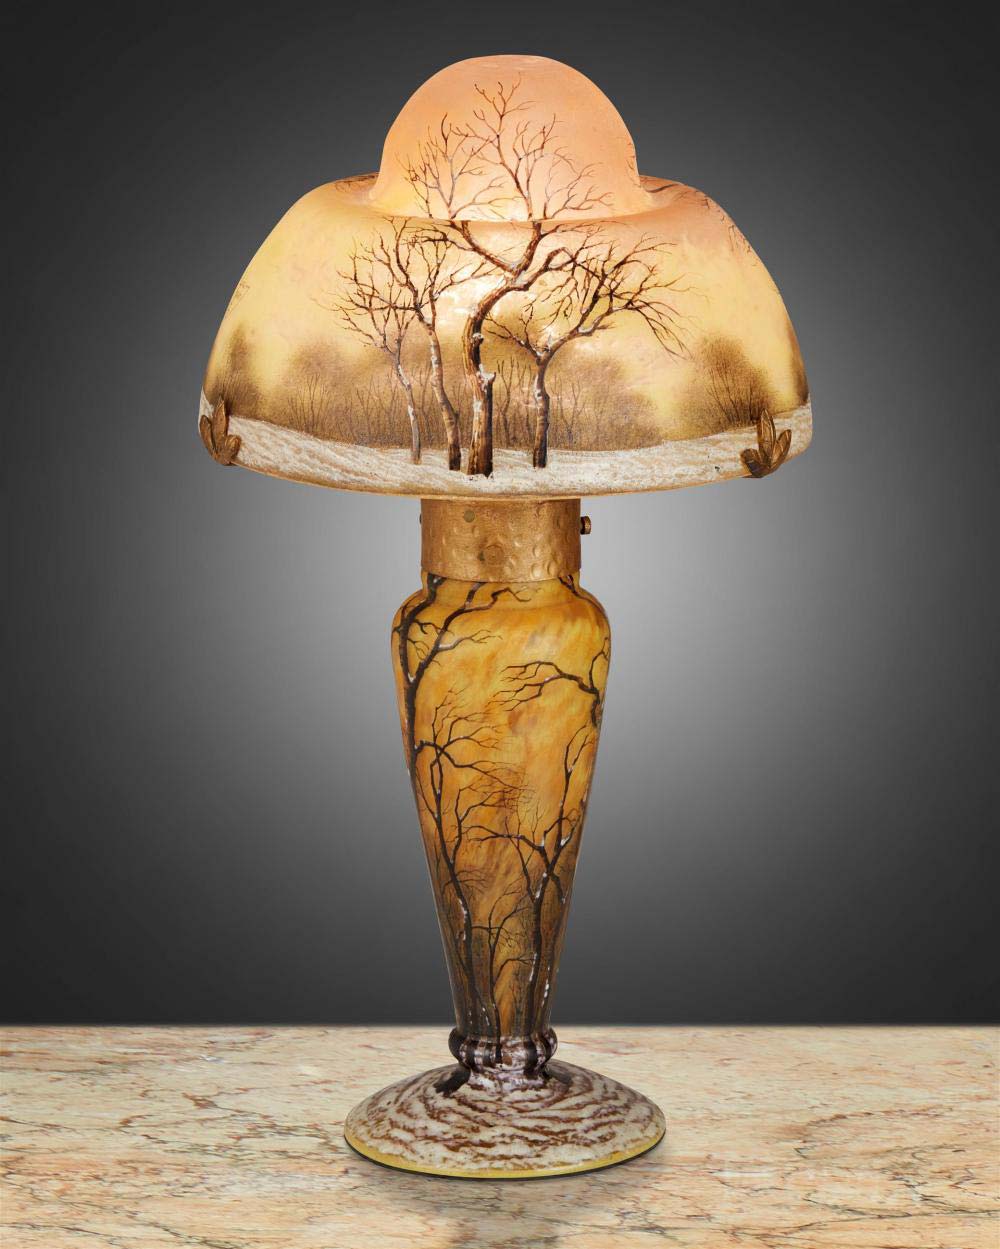 Cameo glass and enameled "Paysage d'Hiver" lamp, $11,875. Image courtesy John Moran Auctioneers